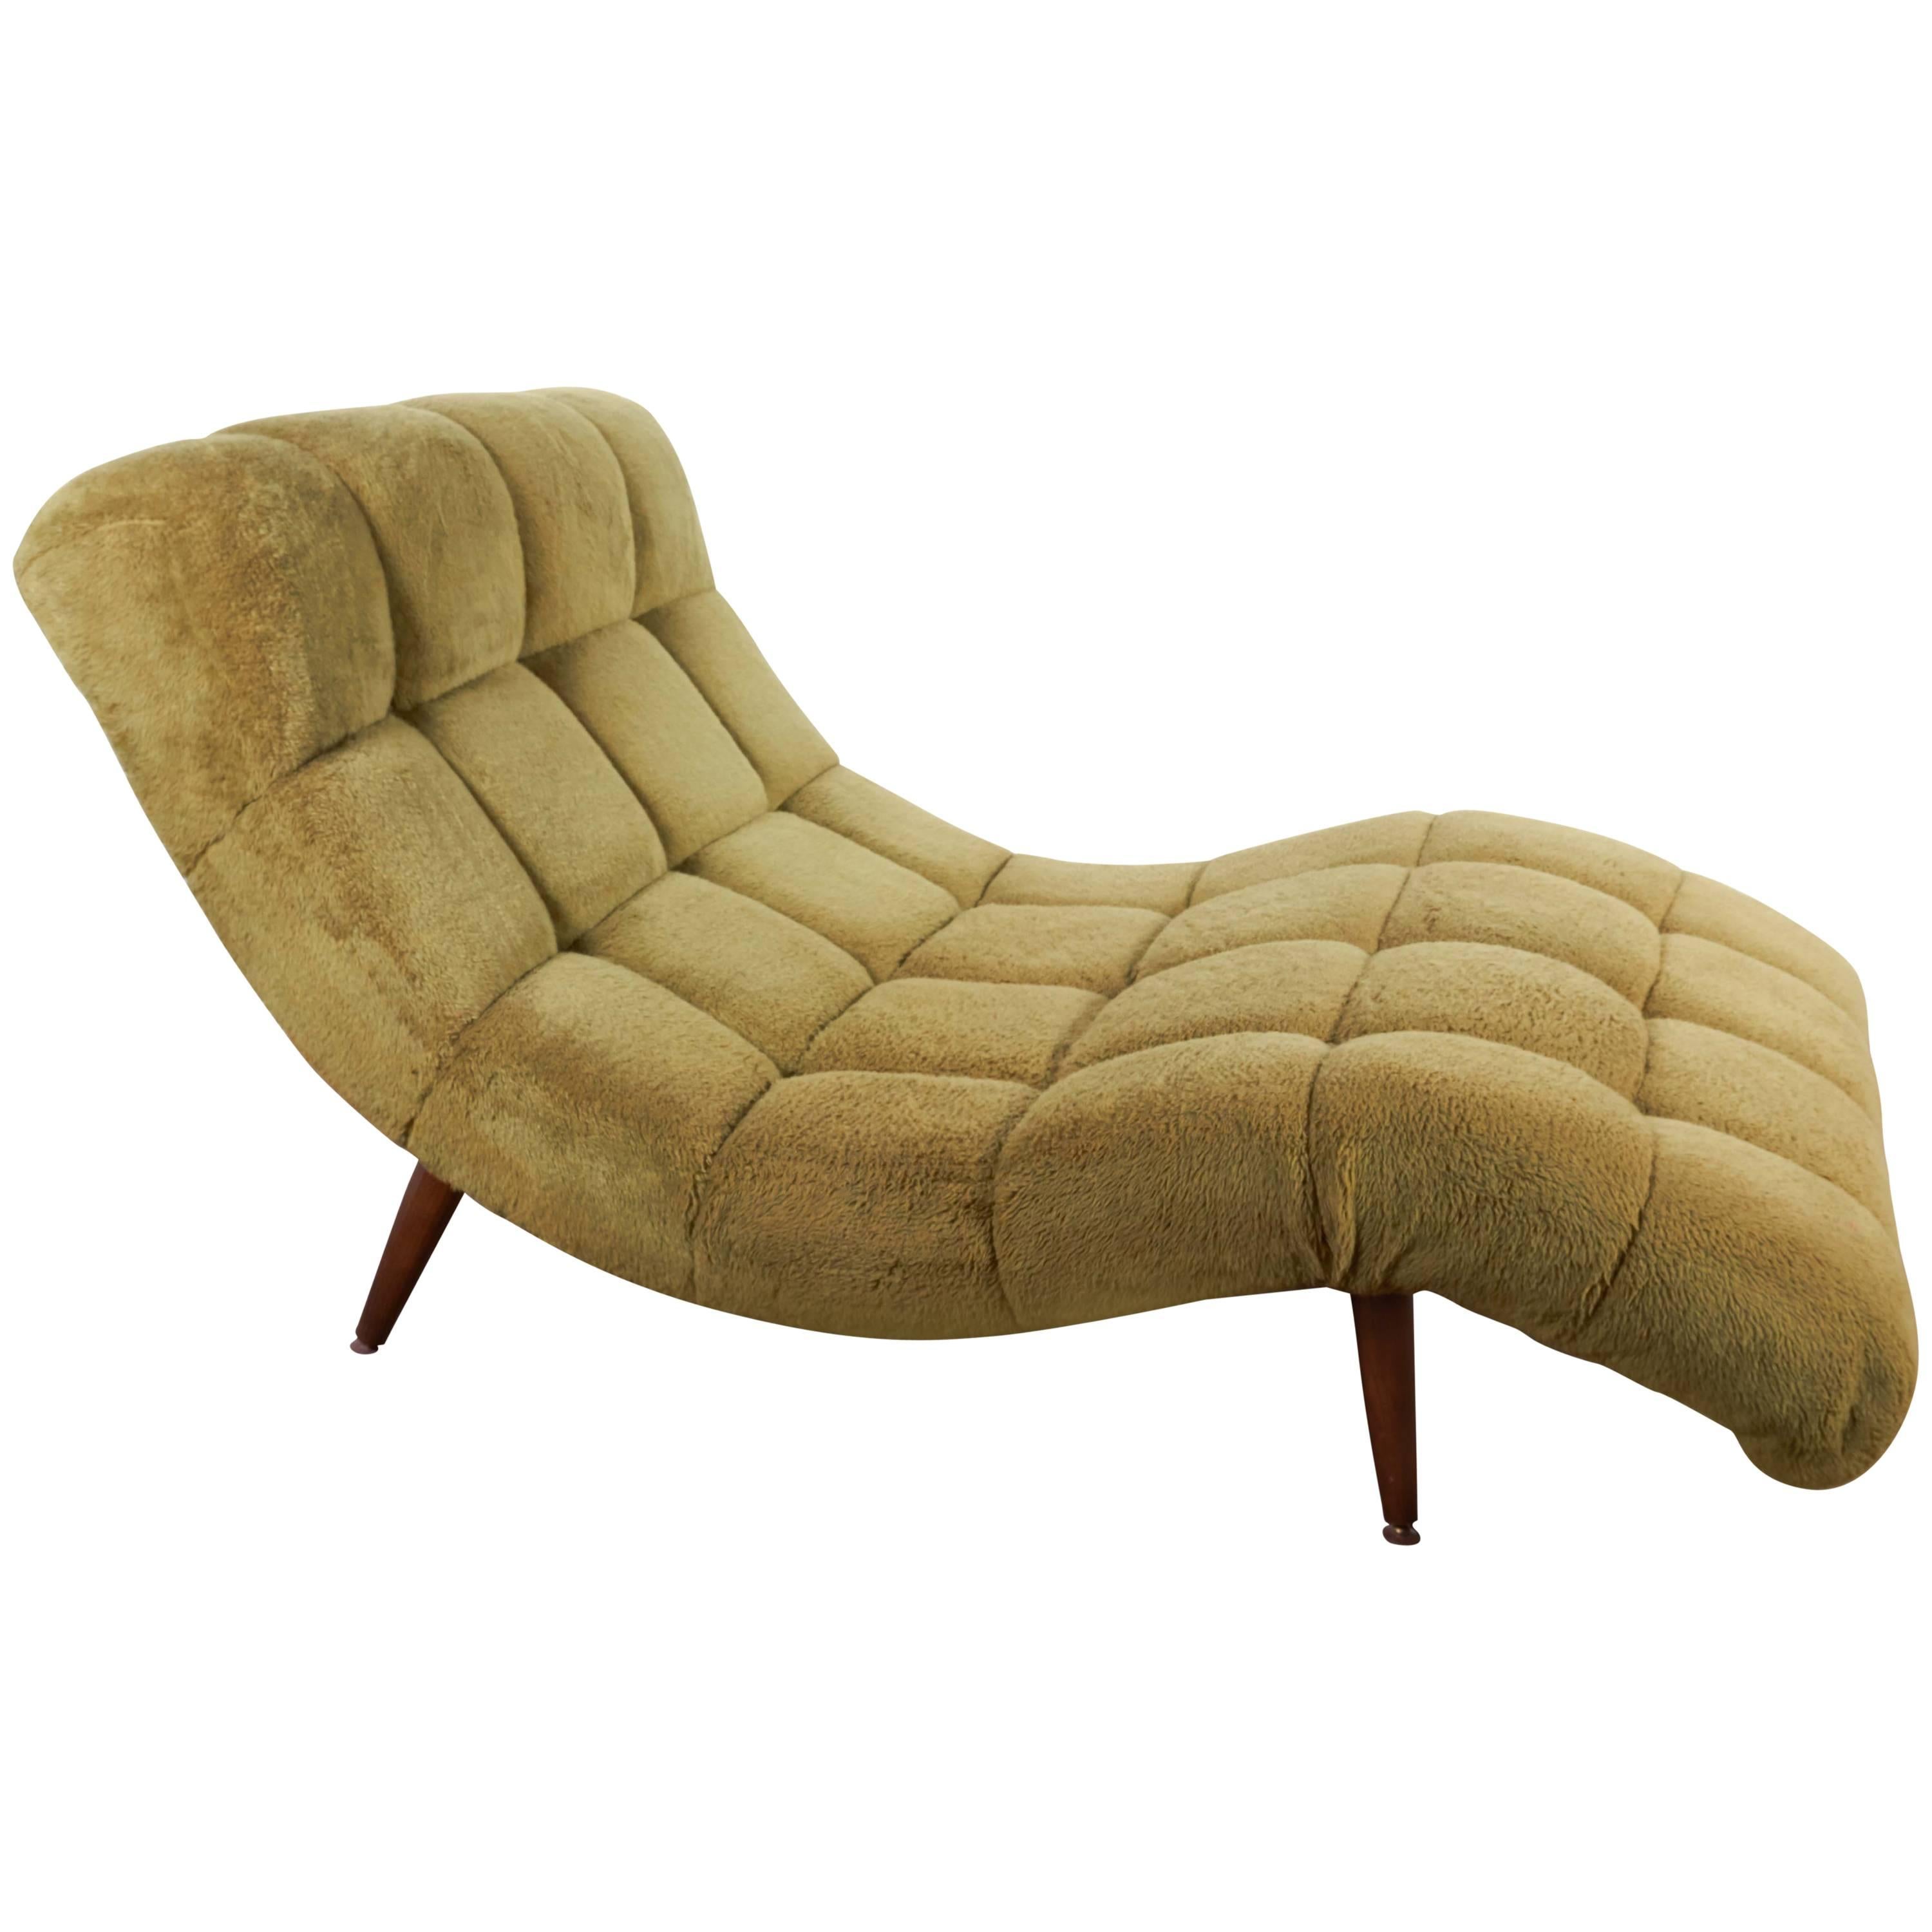 Mid-Century "S" Curve Lounge Chair or Chaise in the style of Adrian Pearsall